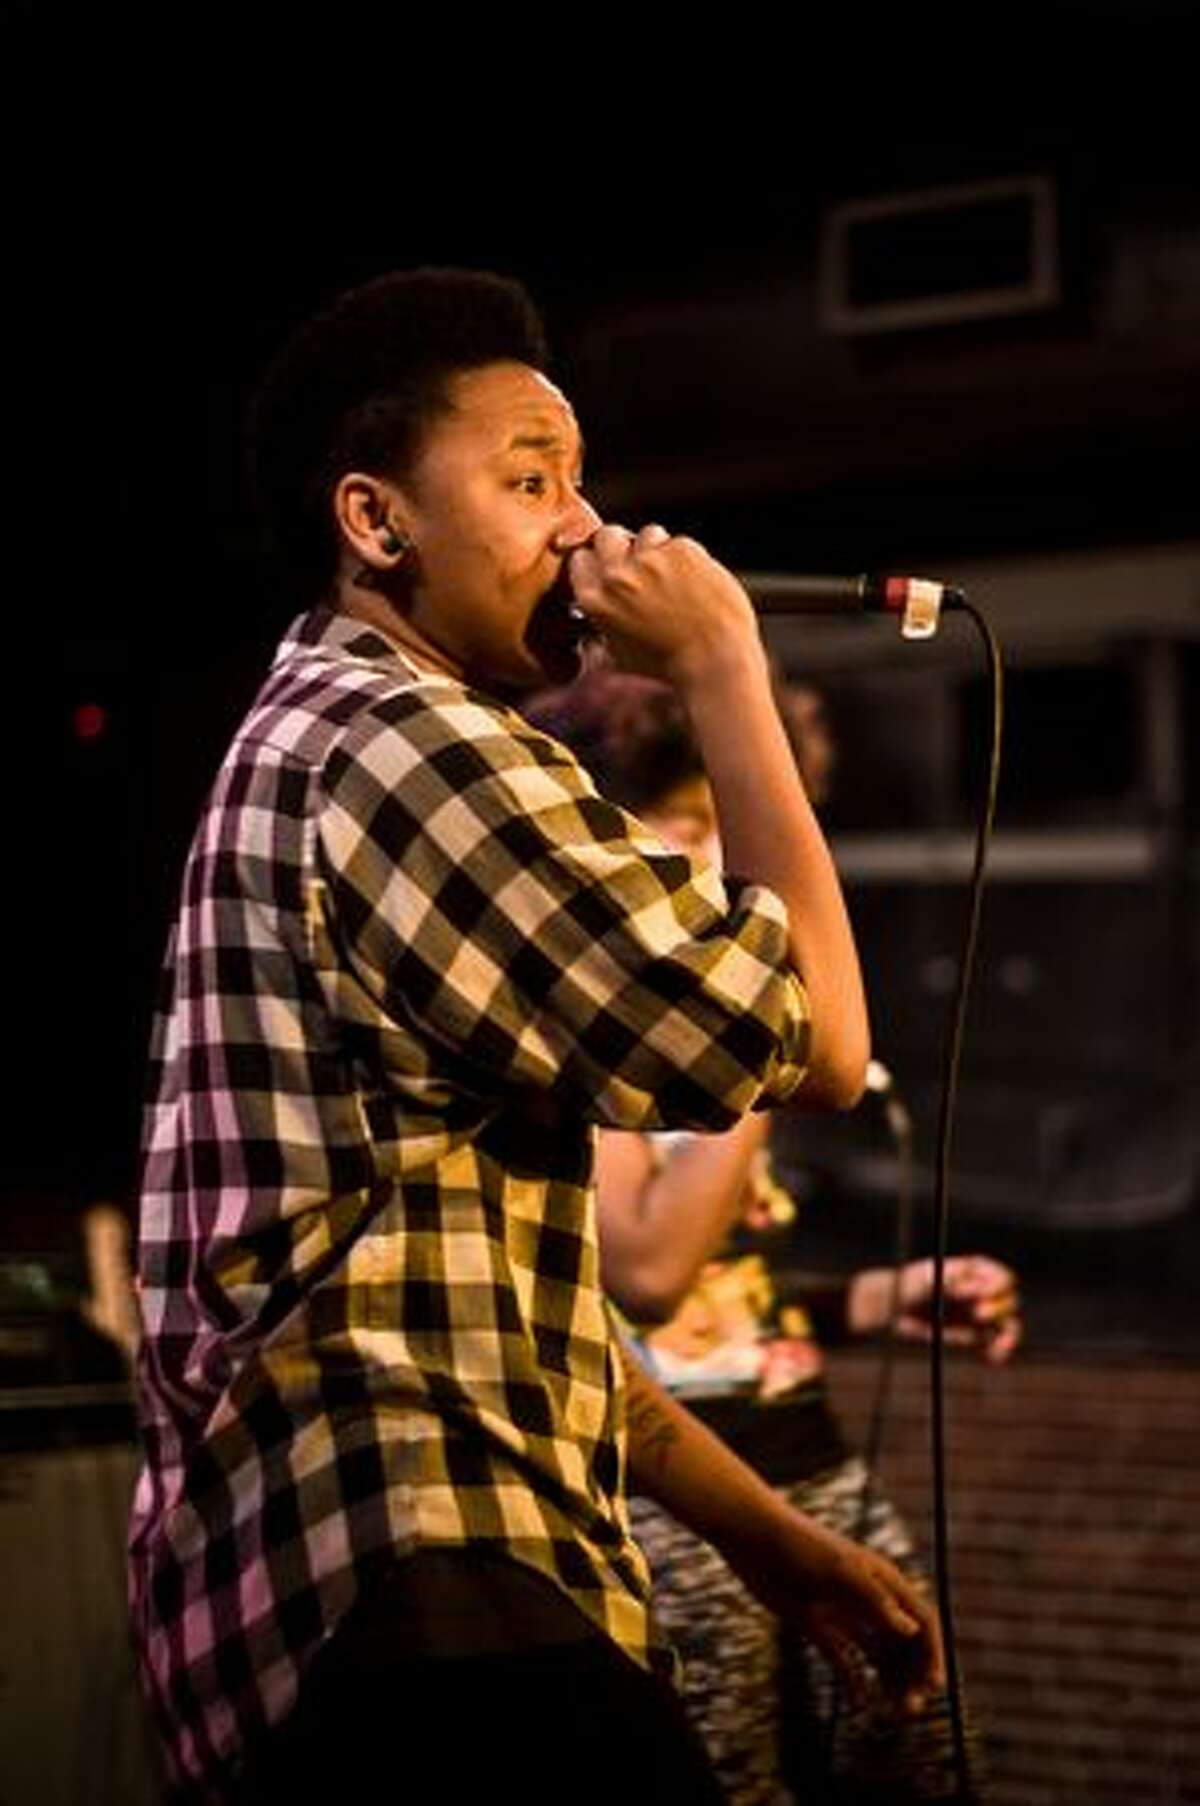 THEESatisfaction perfroming at the SXSW sendoff party at the Tractor. (photo courtesy of Nate Watters)